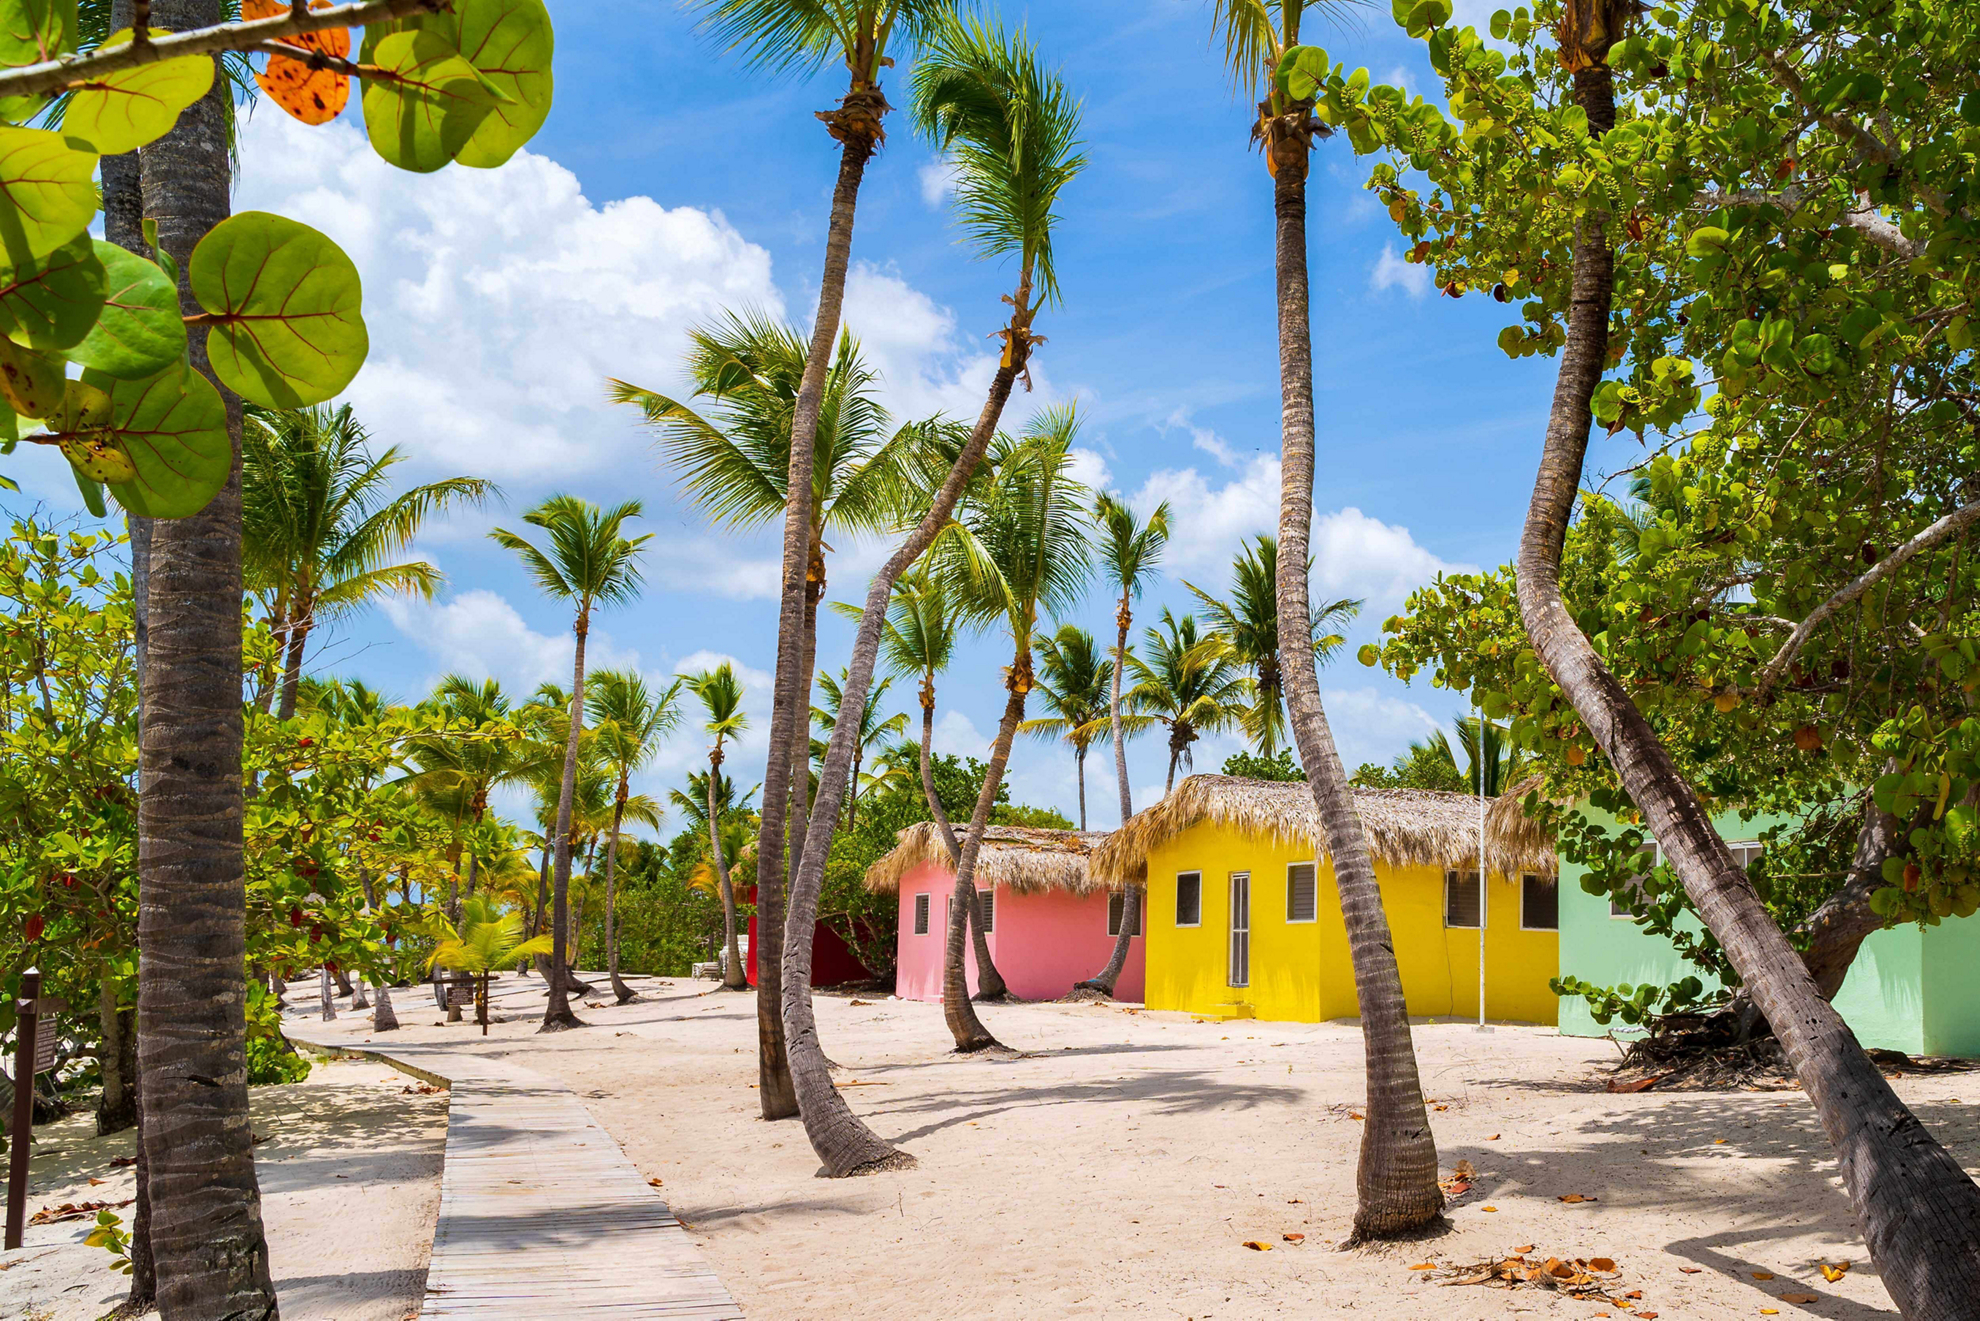 Punta Cana excursions: White beach with palm trees and huts